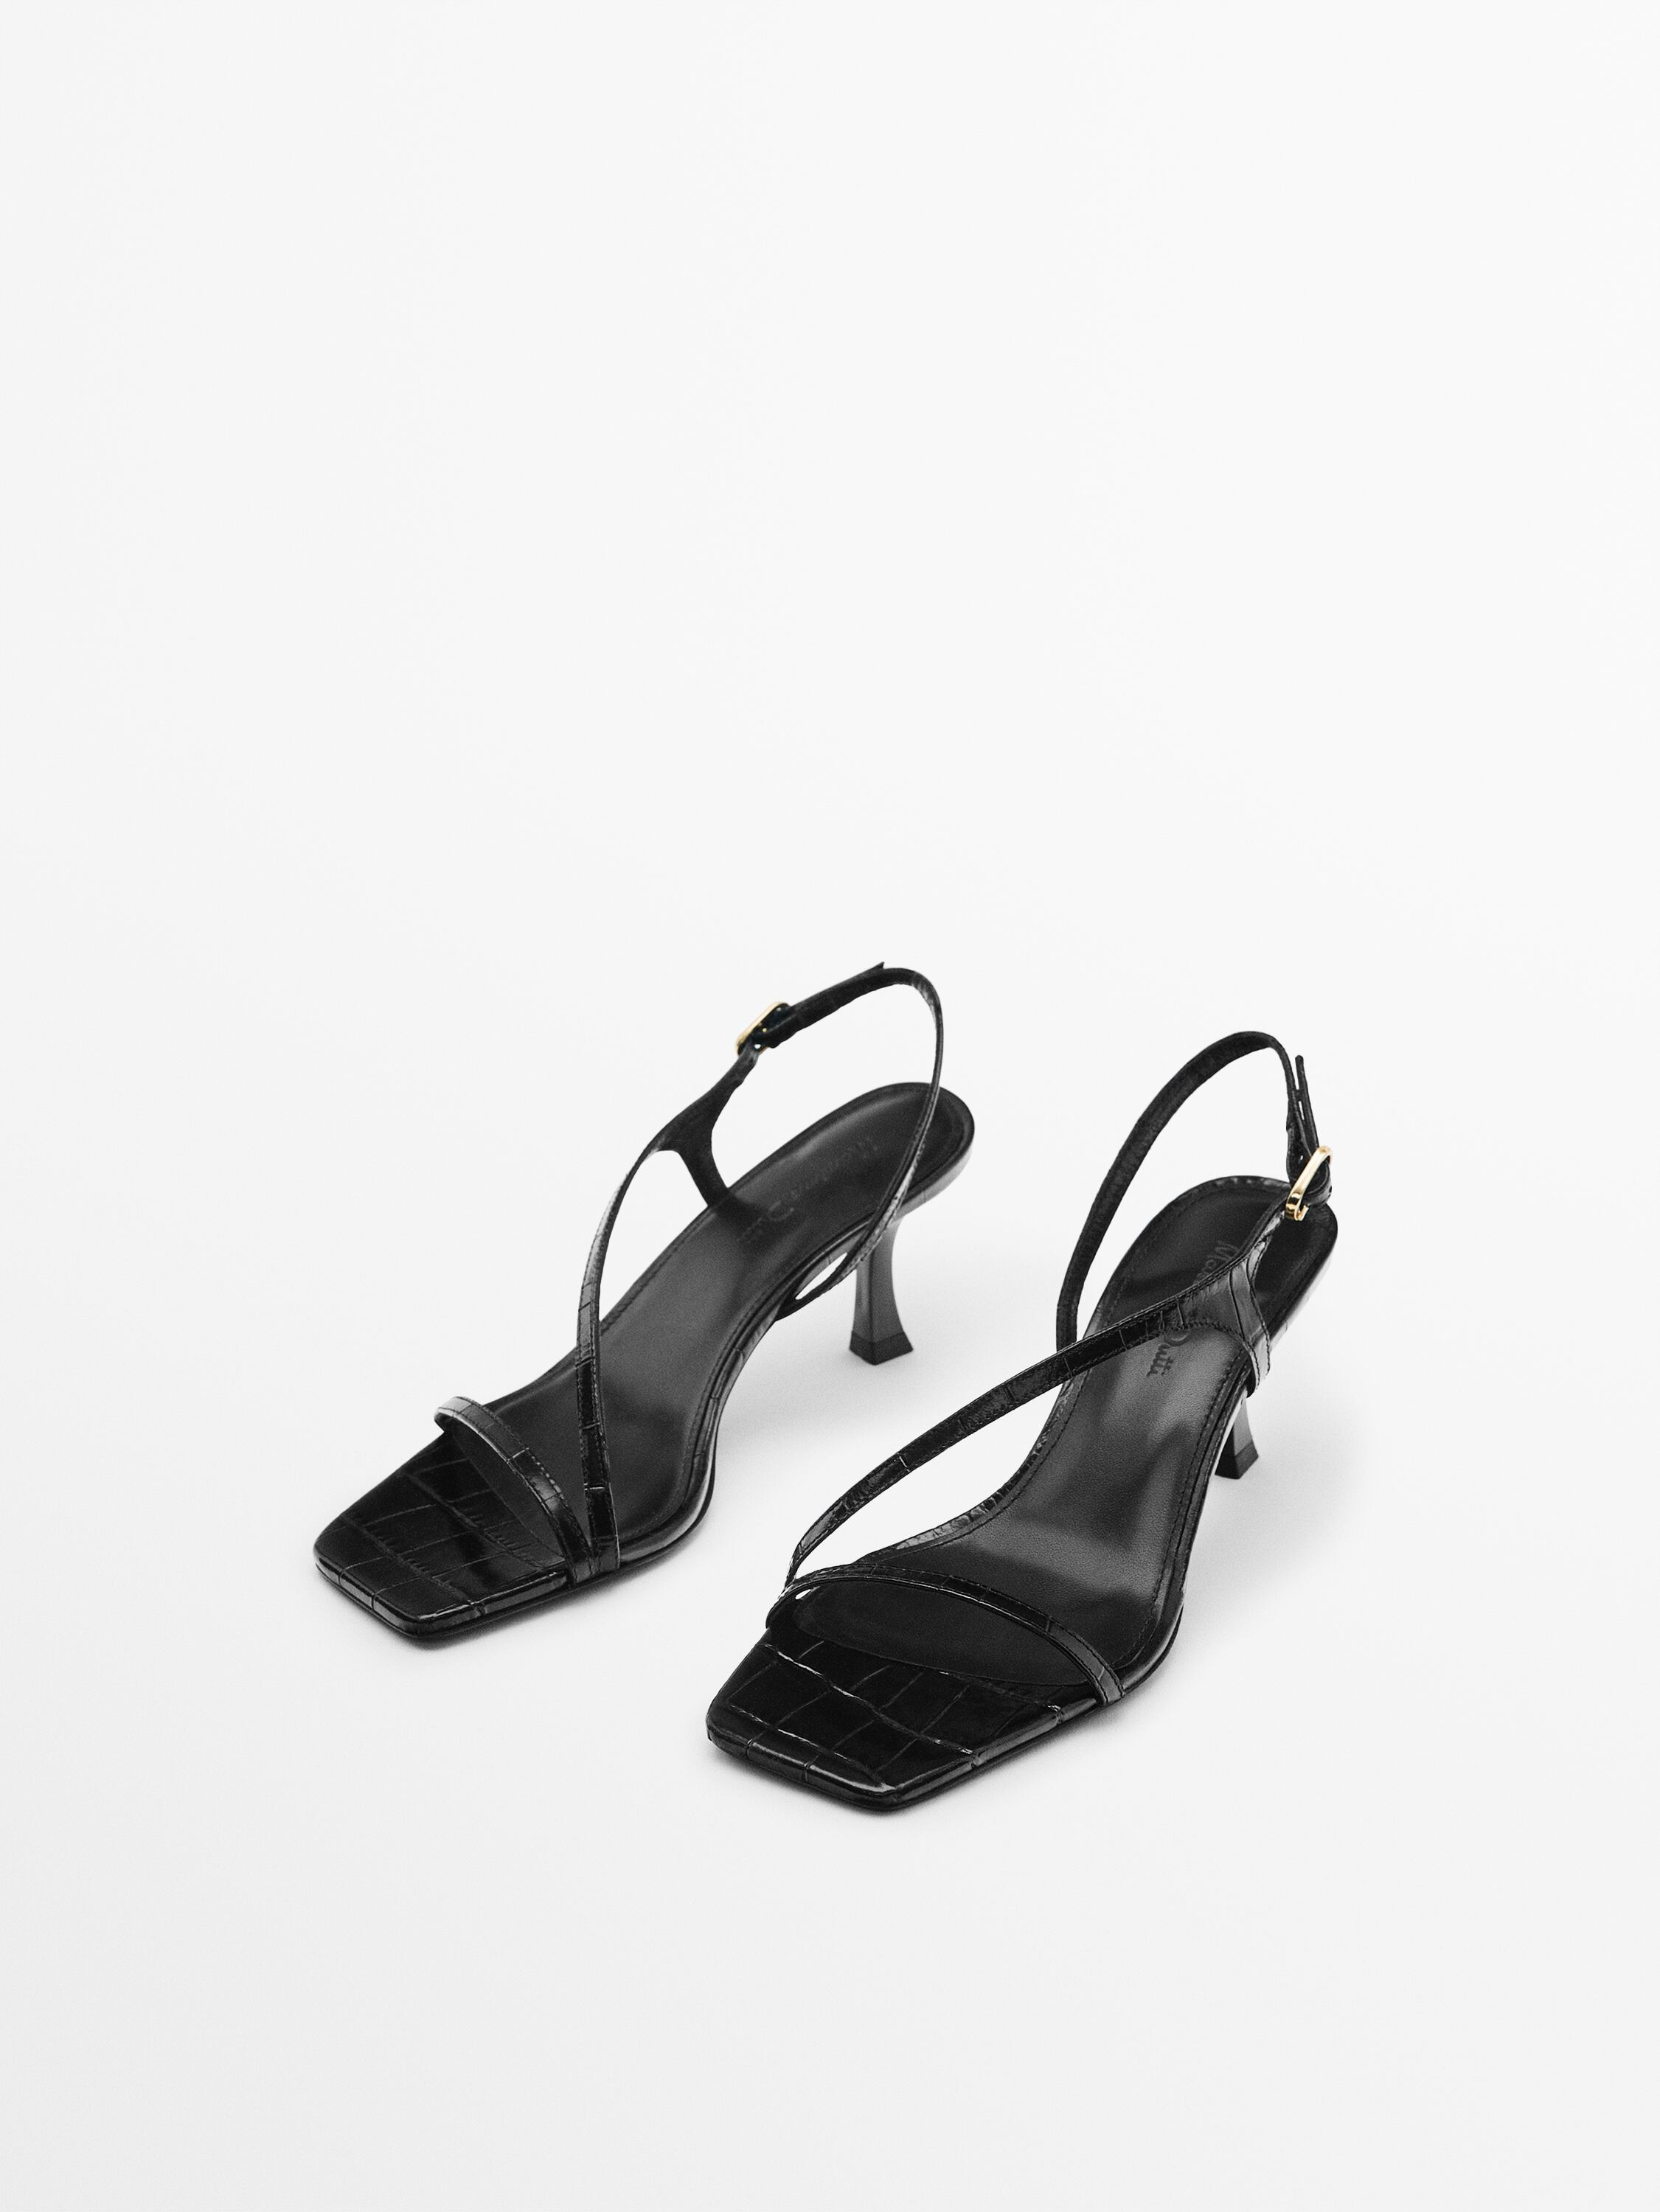 Zara High-heel leather sandals with criss cross strap | Mall of America®